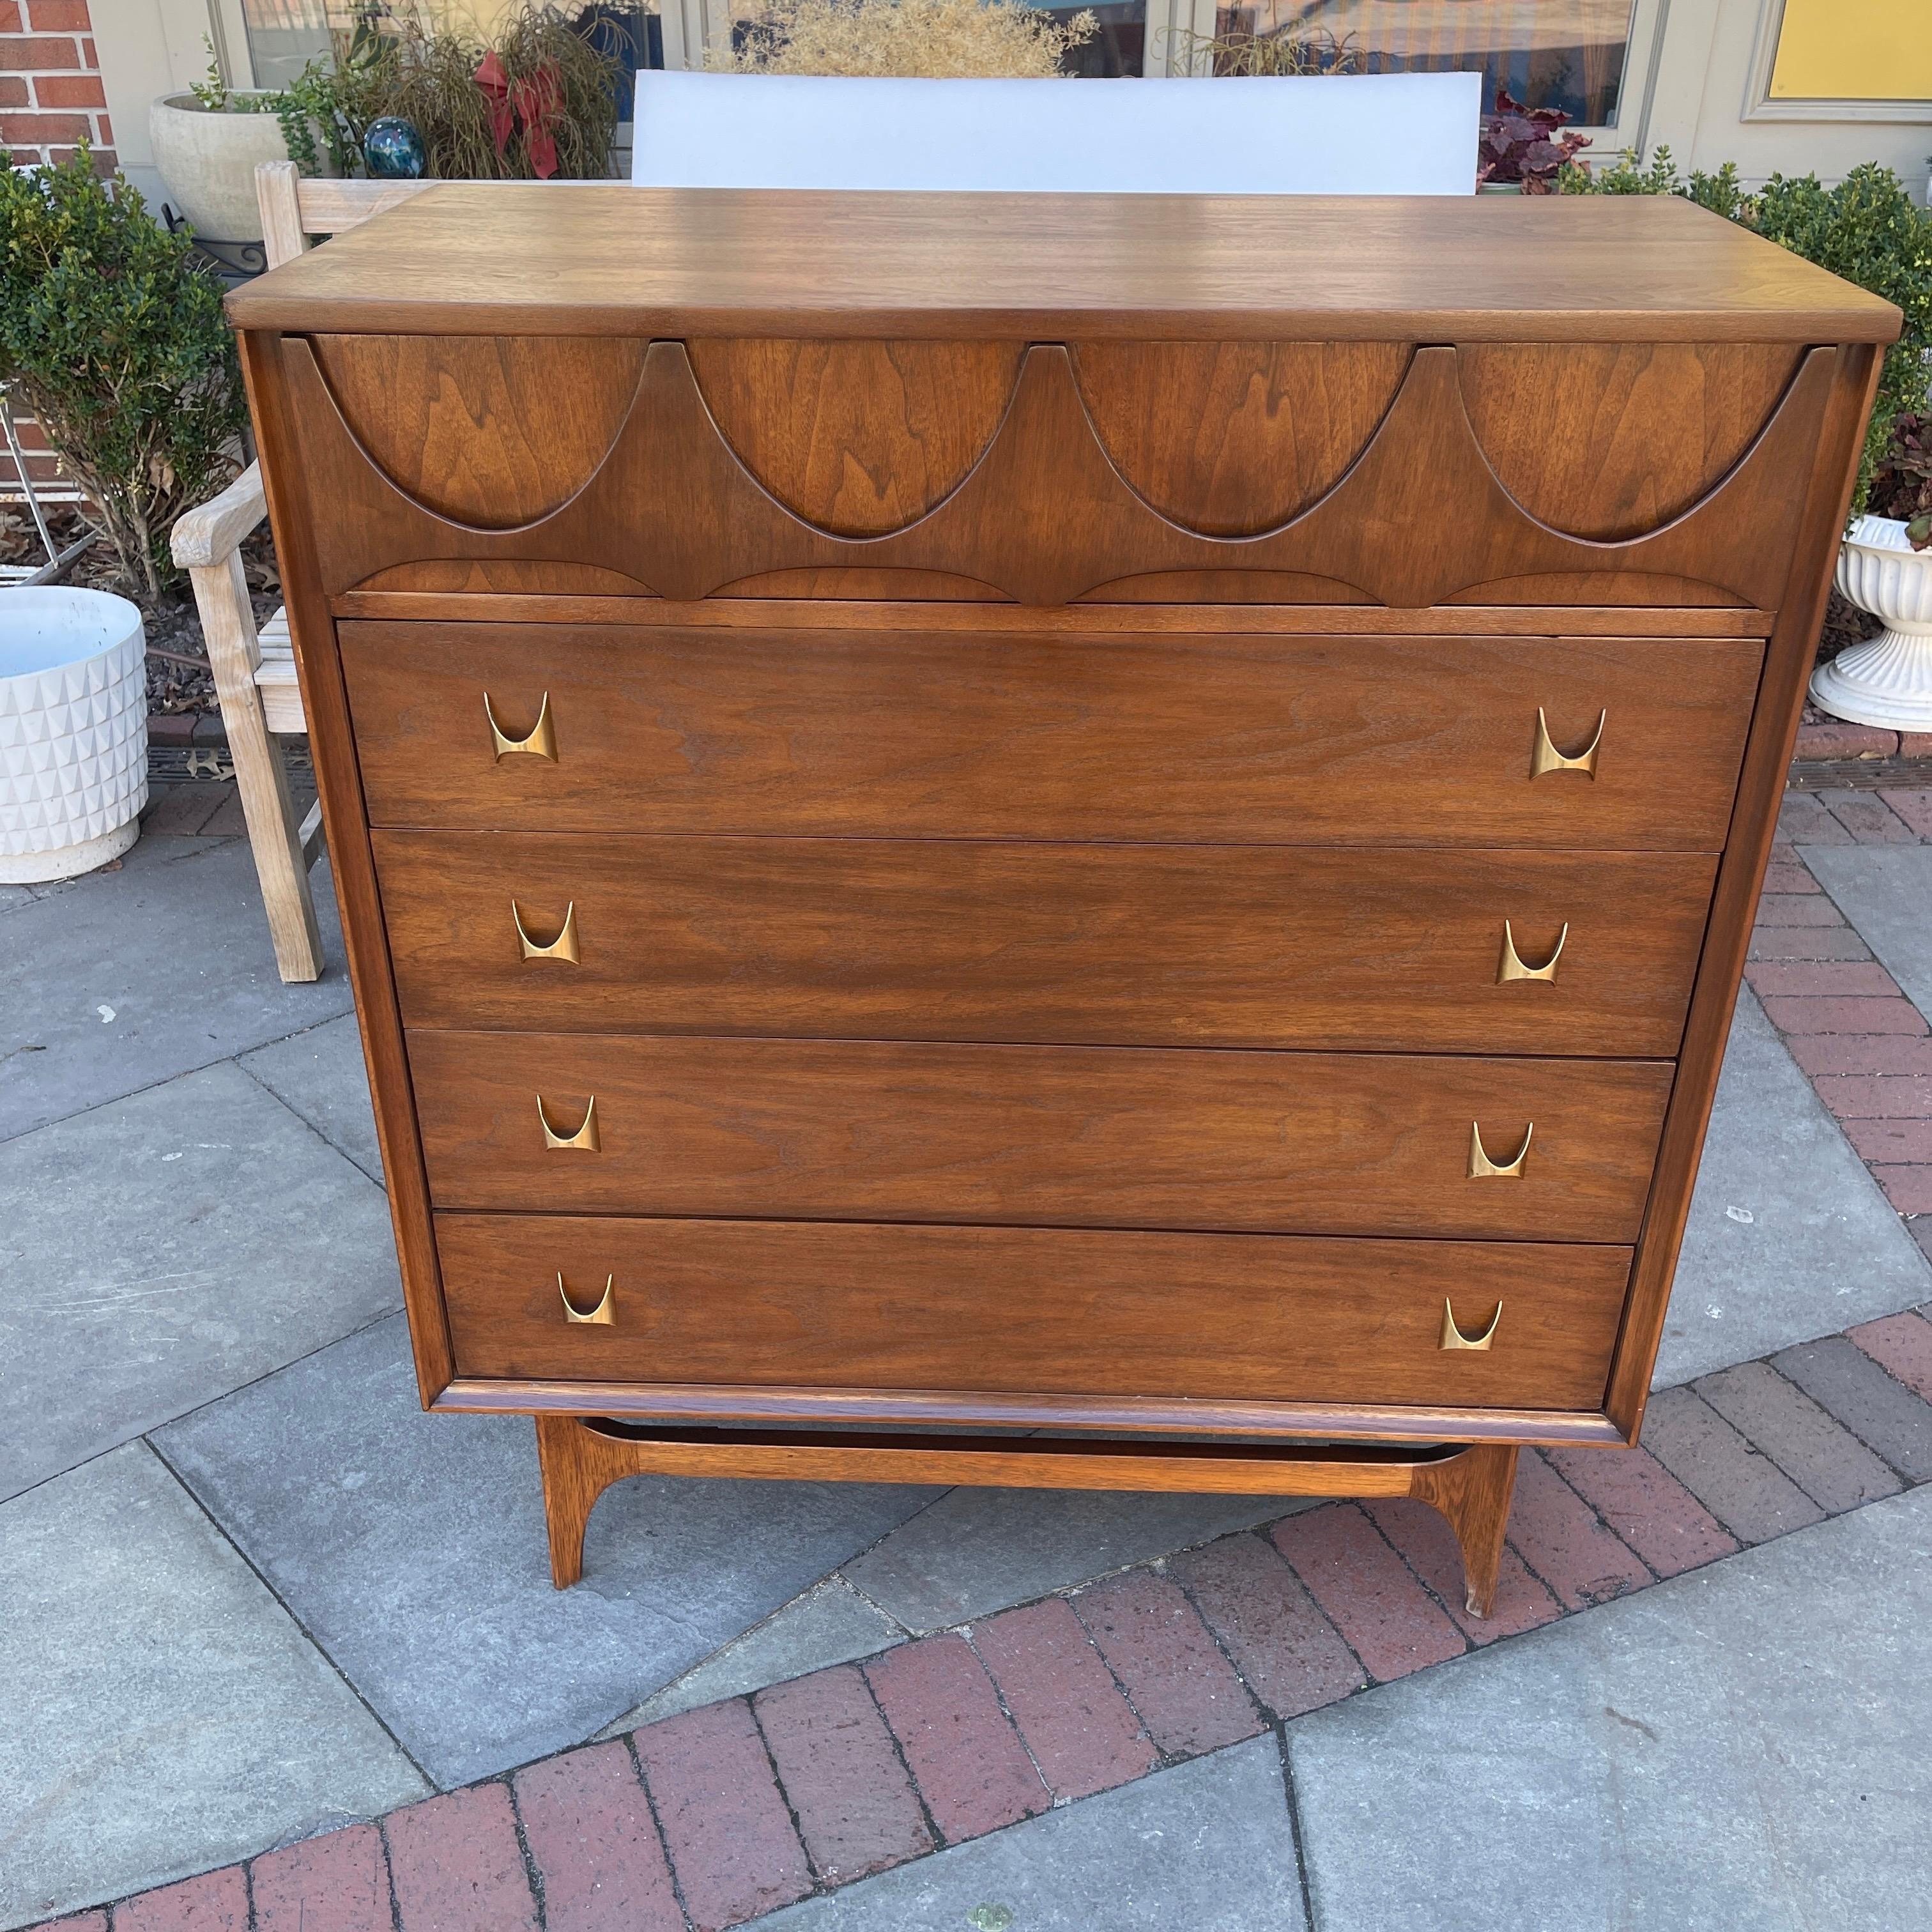 Mid-Century Modern Broyhill Brasilia chest of drawers dresser. American mid-century Brasilia chest of drawers by Broyhill. No other American mid-century furniture line has become as synonymous with a certain type of curvilinear decoration as